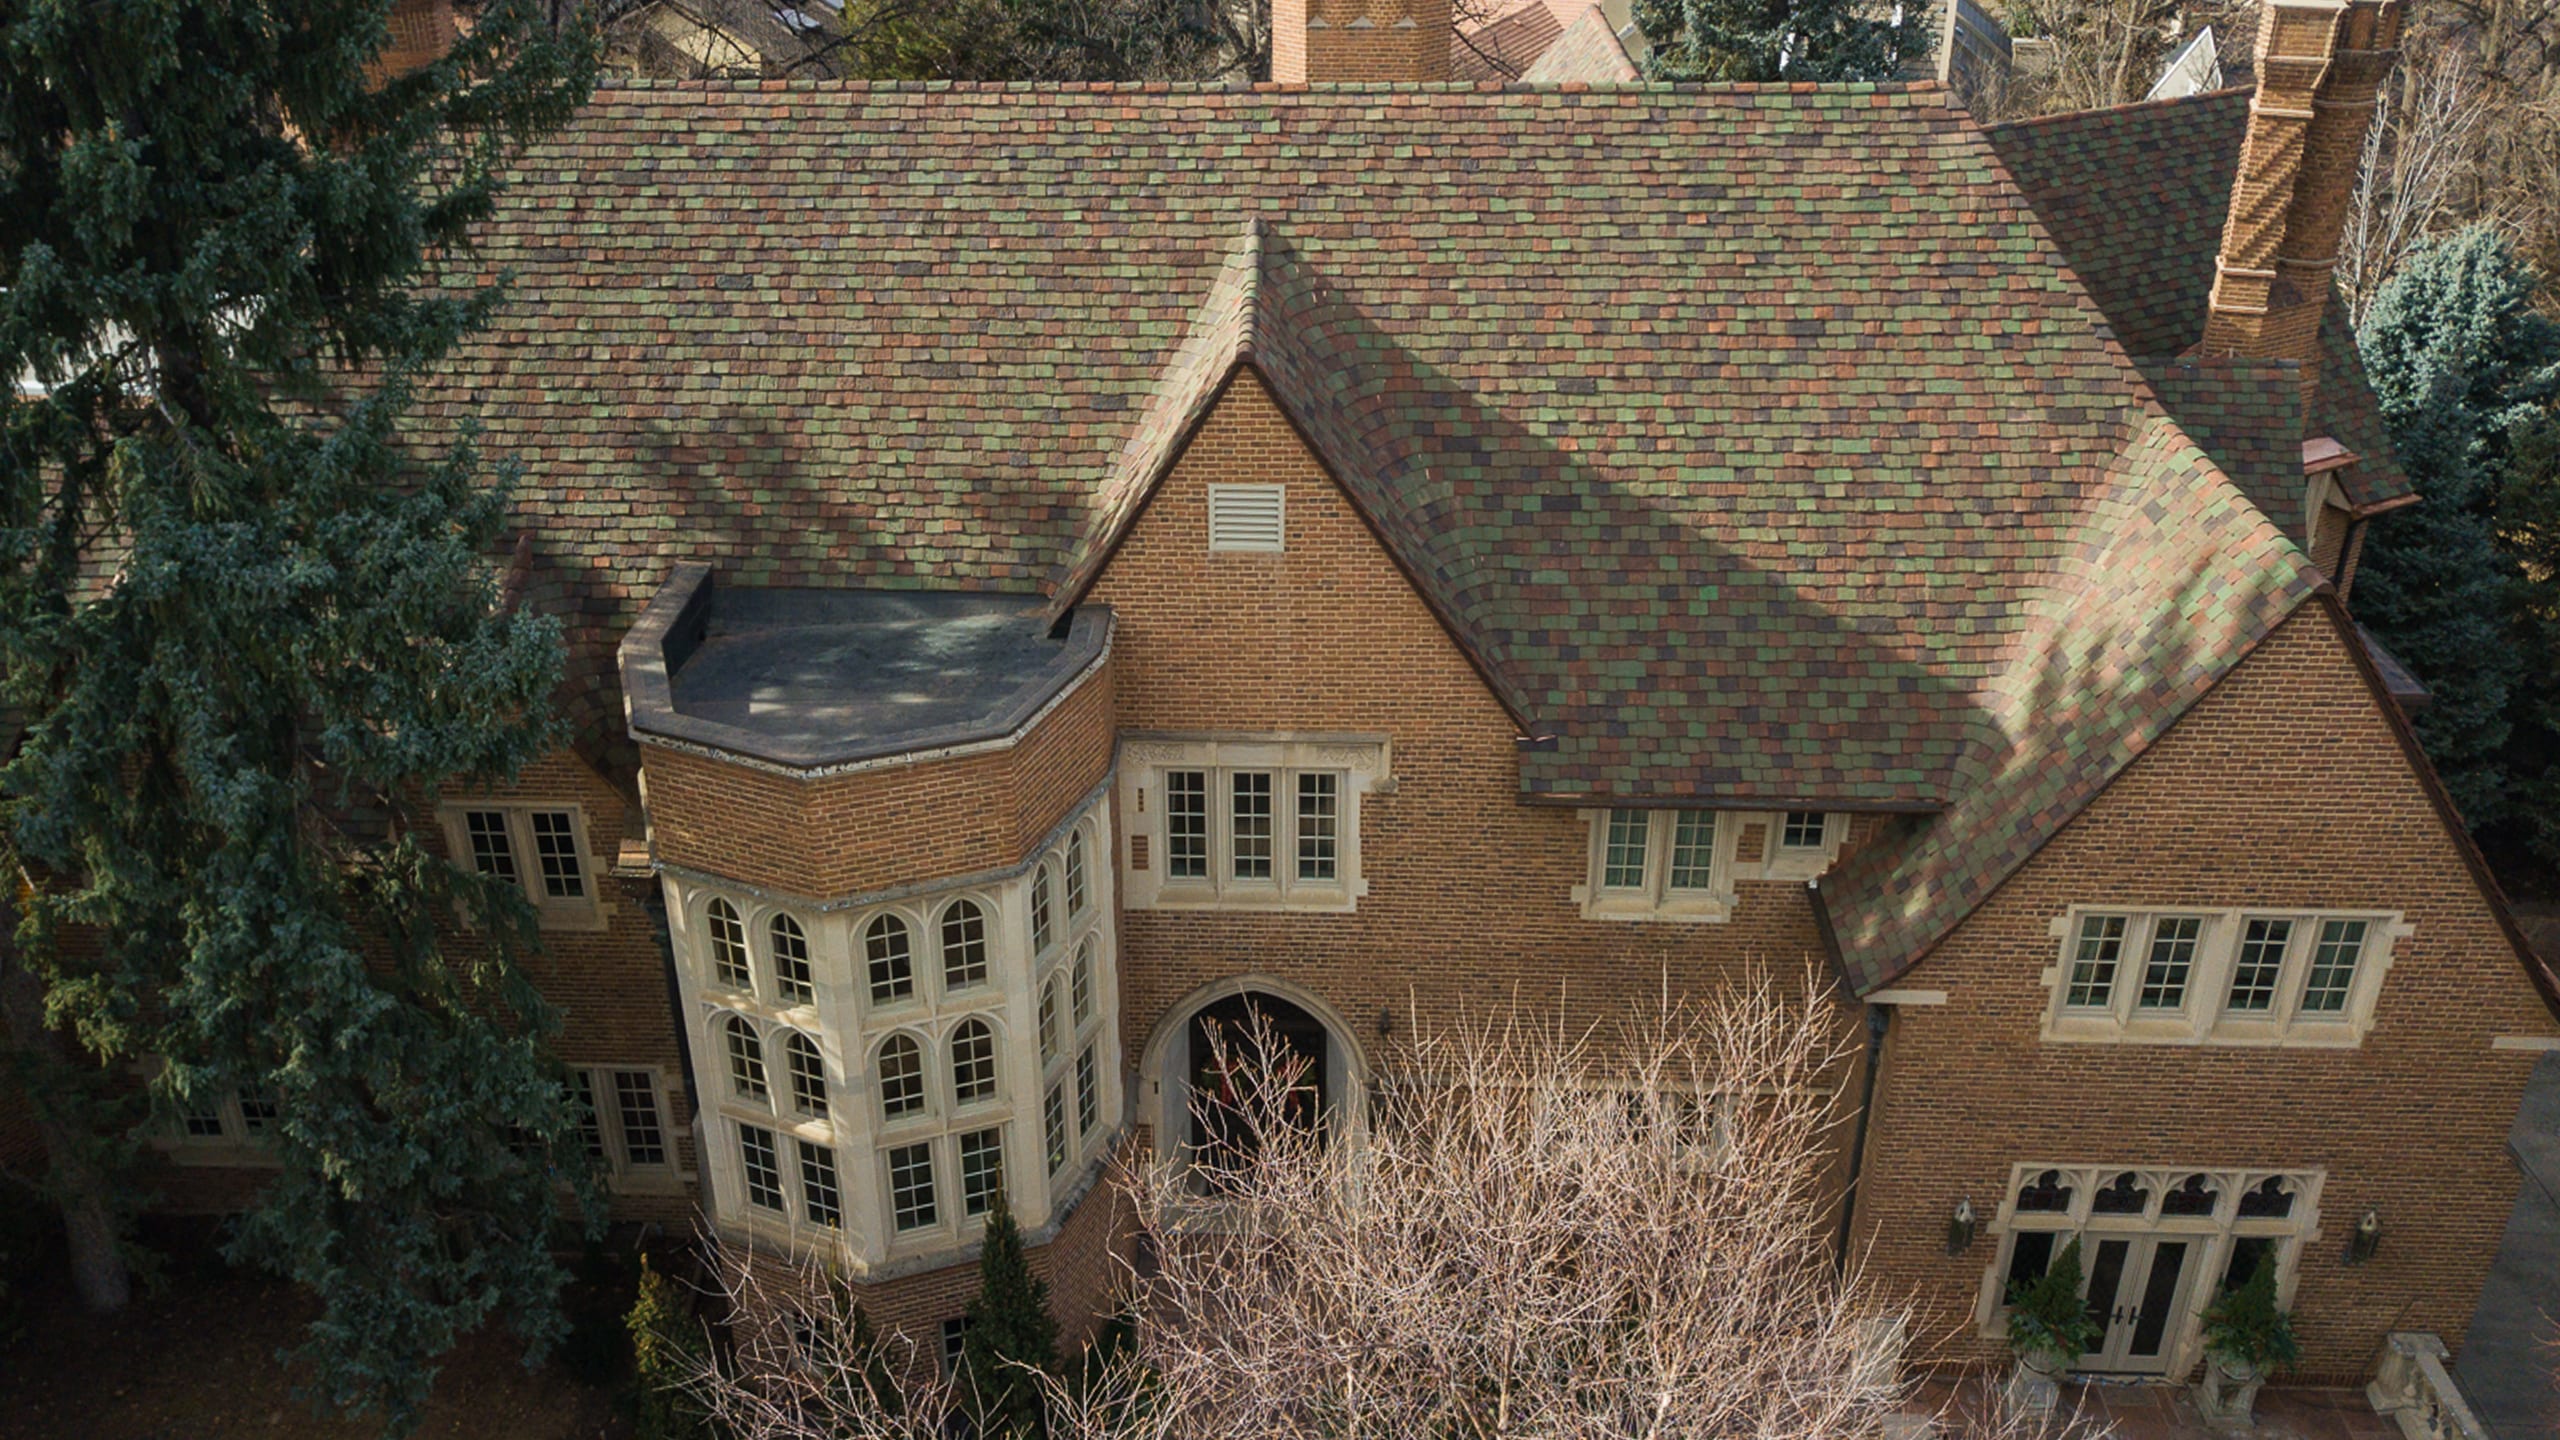 Private Residence in Denver, CO featuring Ludowici terra cotta roof tile.